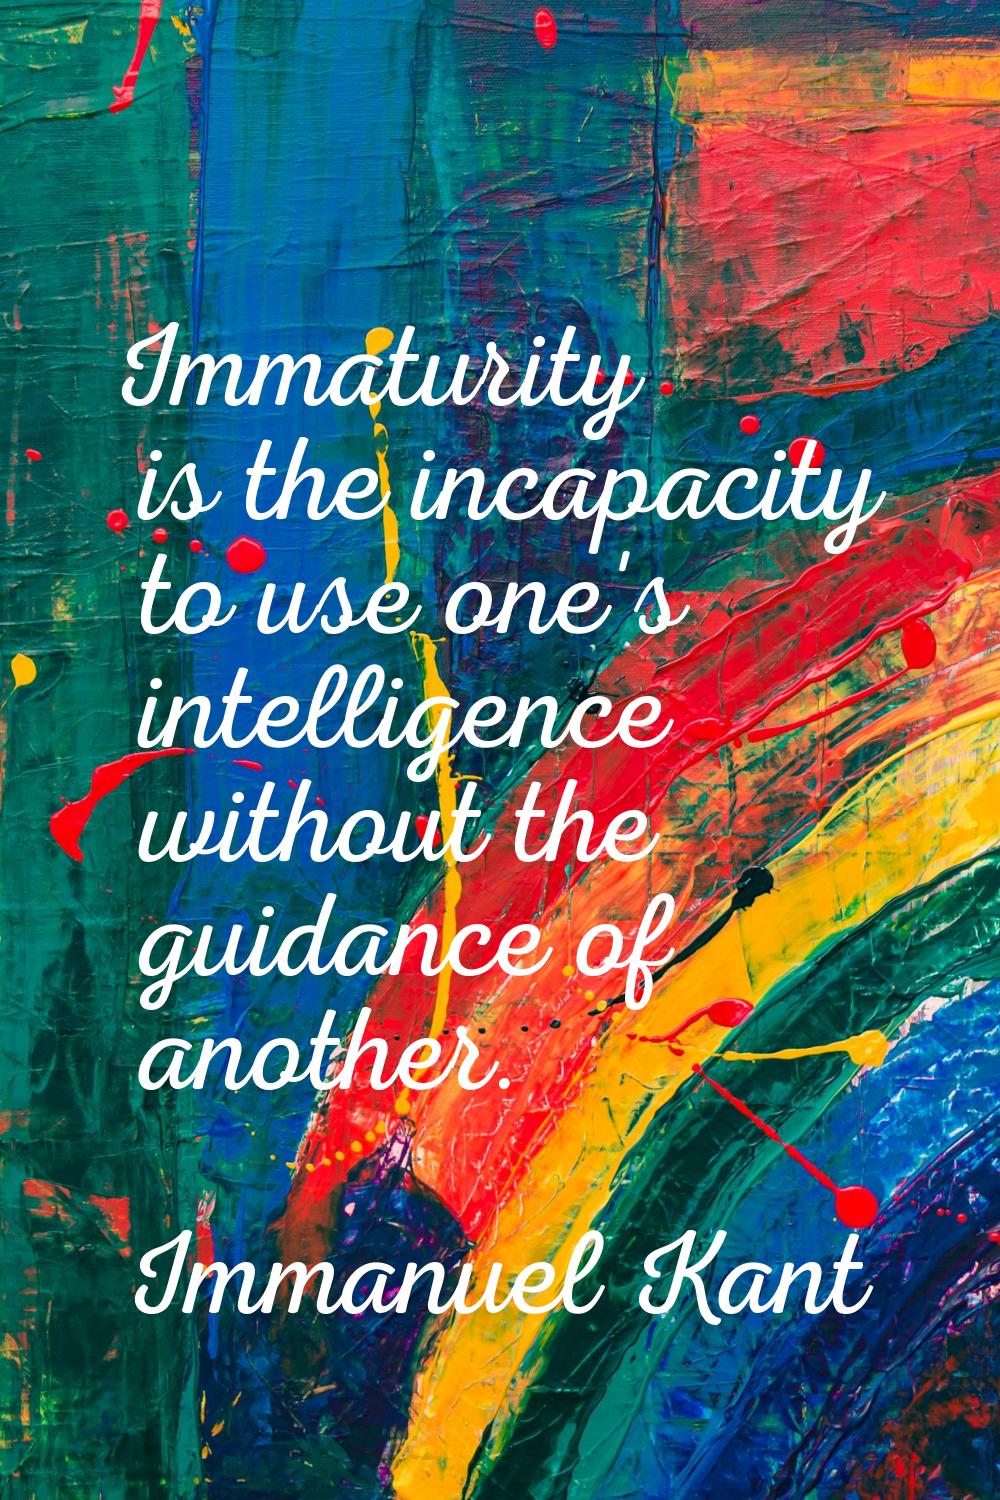 Immaturity is the incapacity to use one's intelligence without the guidance of another.